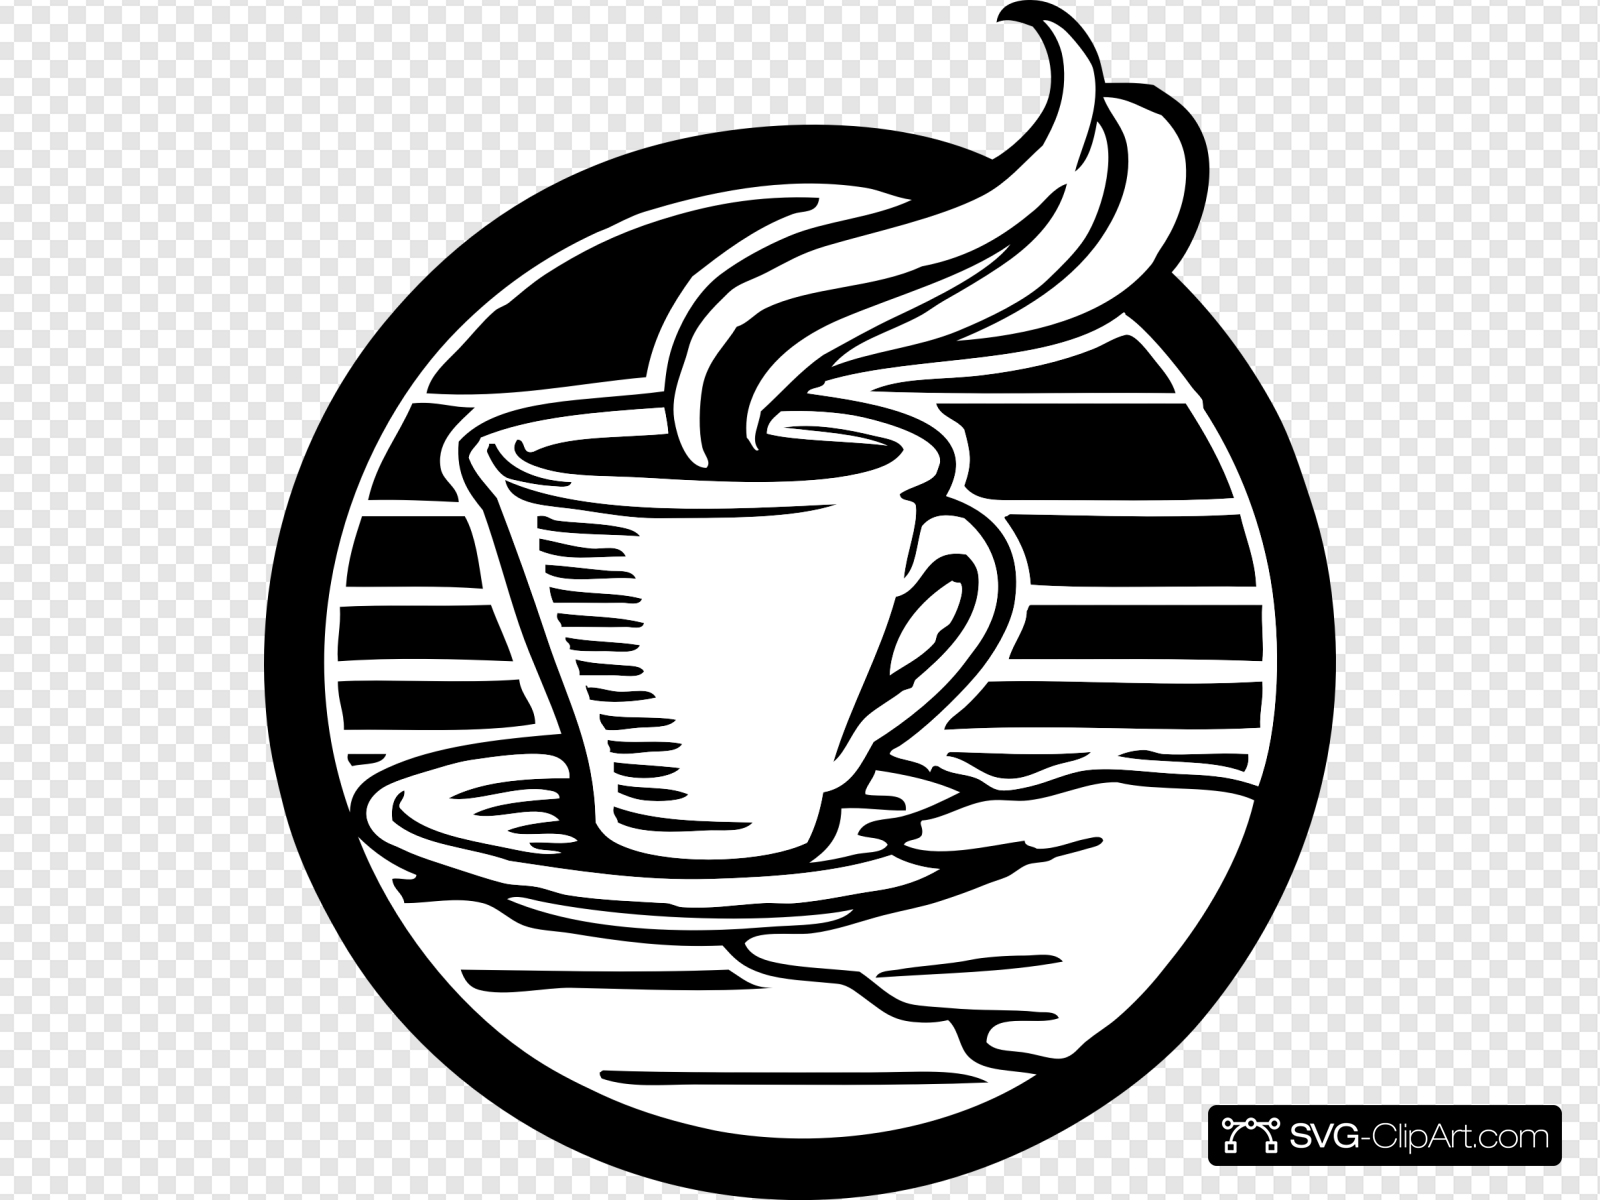 Cup Of Coffee Clip art, Icon and SVG